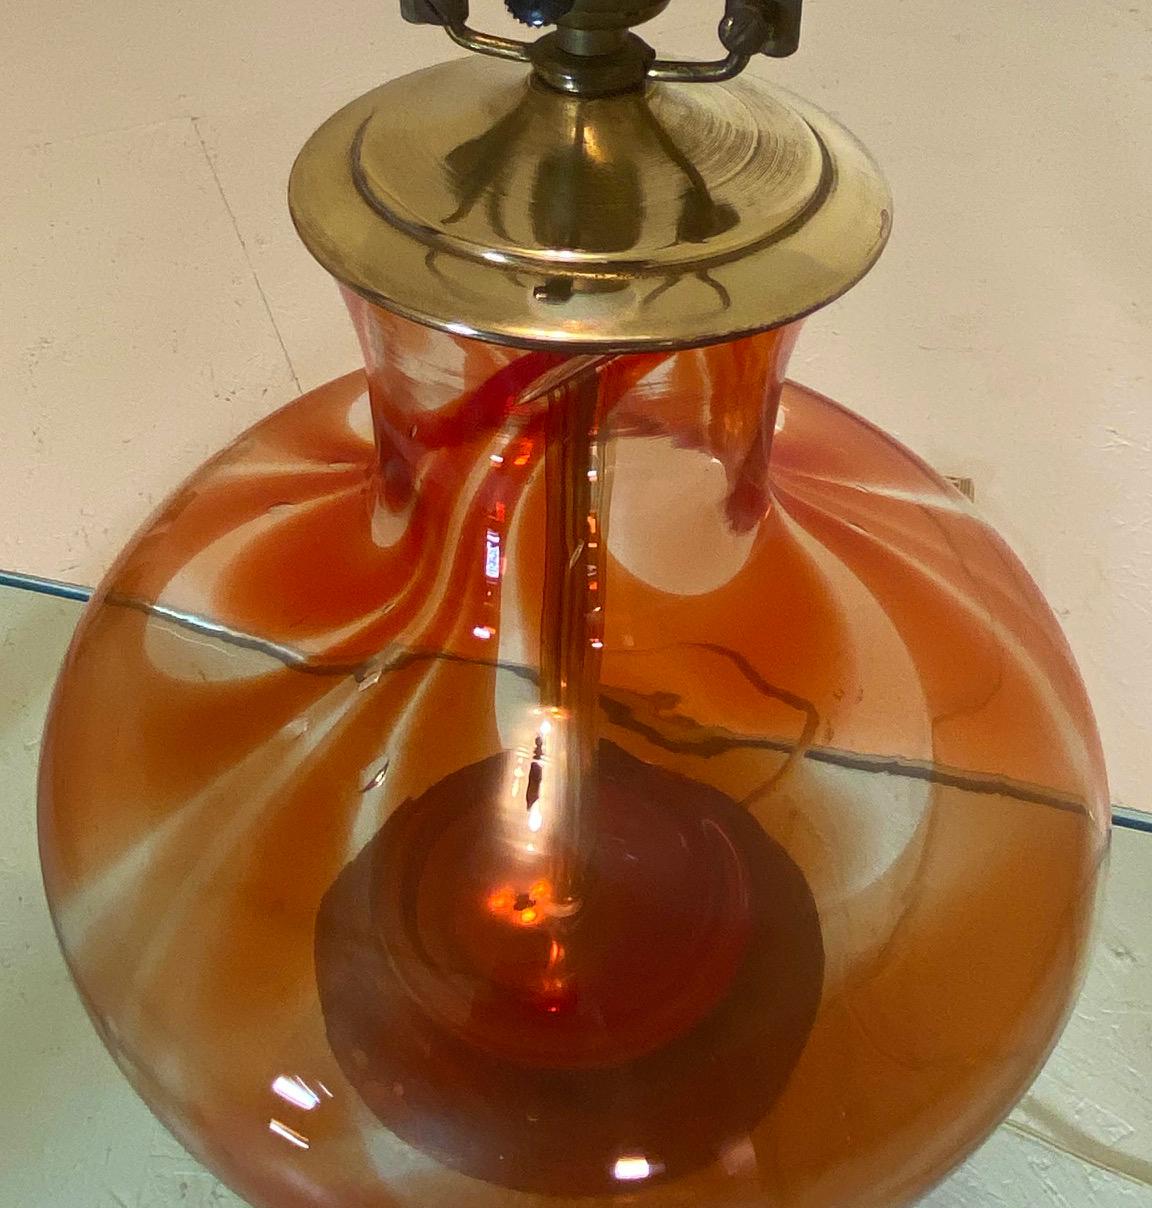 The Charimsa series by John Nickerson for Blenko of 1972 is a highly regarded and collectible line of the art glass from the Blenko Studios of Milton, WV. This bulbous table lamp is very uncommon and is believed to be the only example of a lamp ever